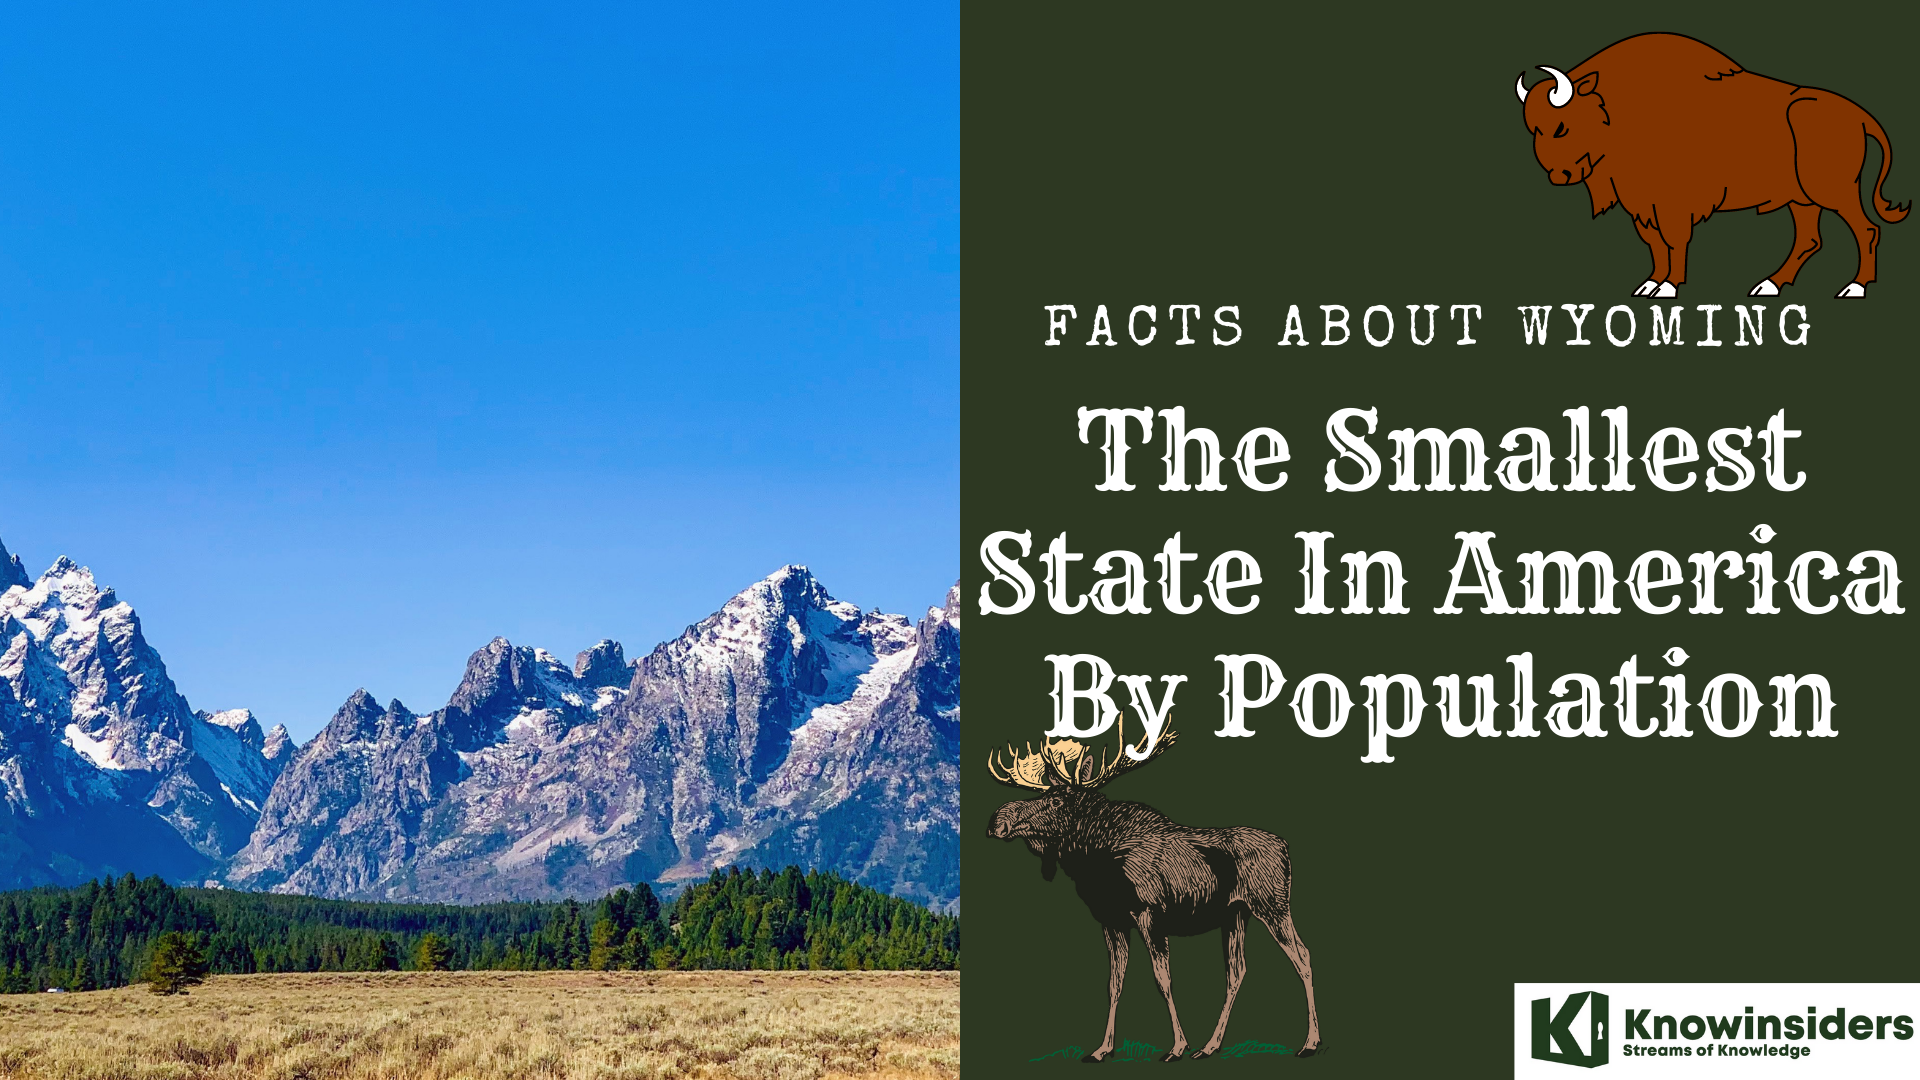 10 Facts About Wyoming - The Smallest State In America